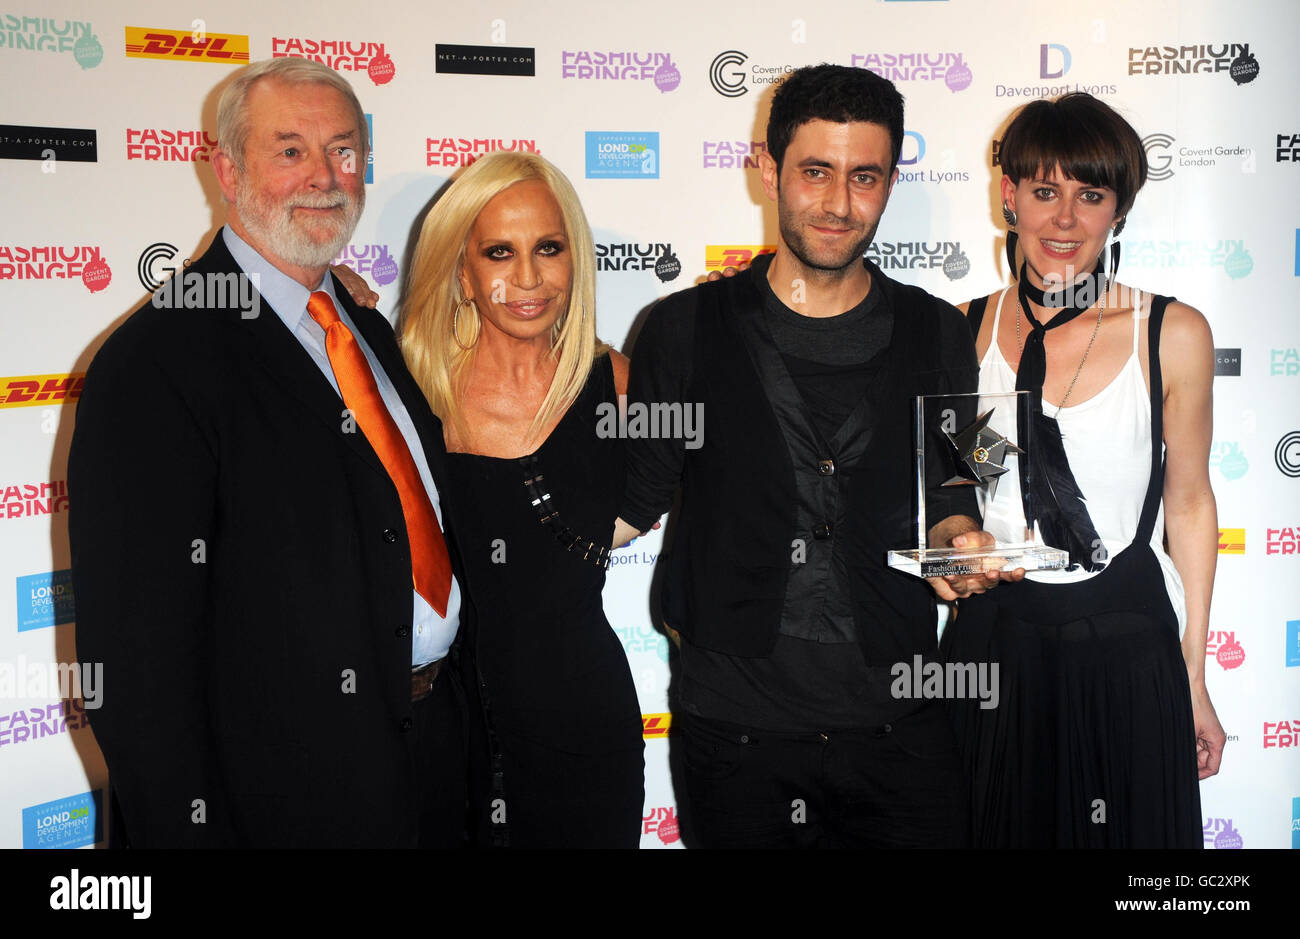 accessoires Algebraïsch slijm from left) Creative director and founder, Colin McDowell, Donatella Versace  and winners Dimitris Theocharidis and Jenny Holmes (Jenna.Theo) during  Fashion Fringe at Covent Garden during London Fashion Week Stock Photo -  Alamy